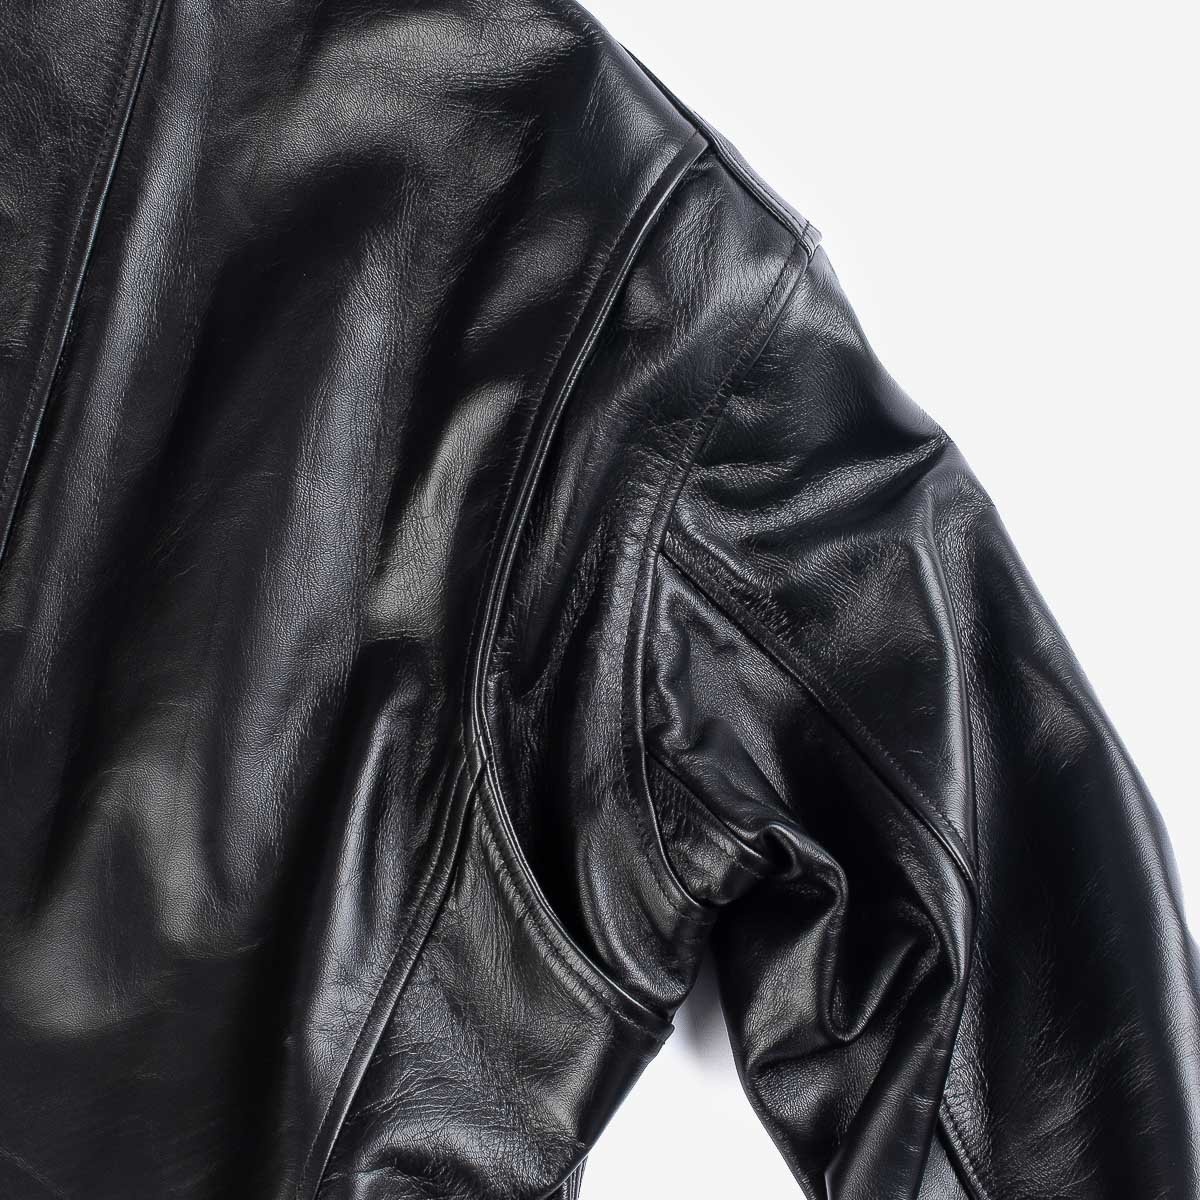 IHJ-54-BLK Japanese Horsehide Rider’s Jacket with Collar - Black (Tea-Core Dyed) - 12